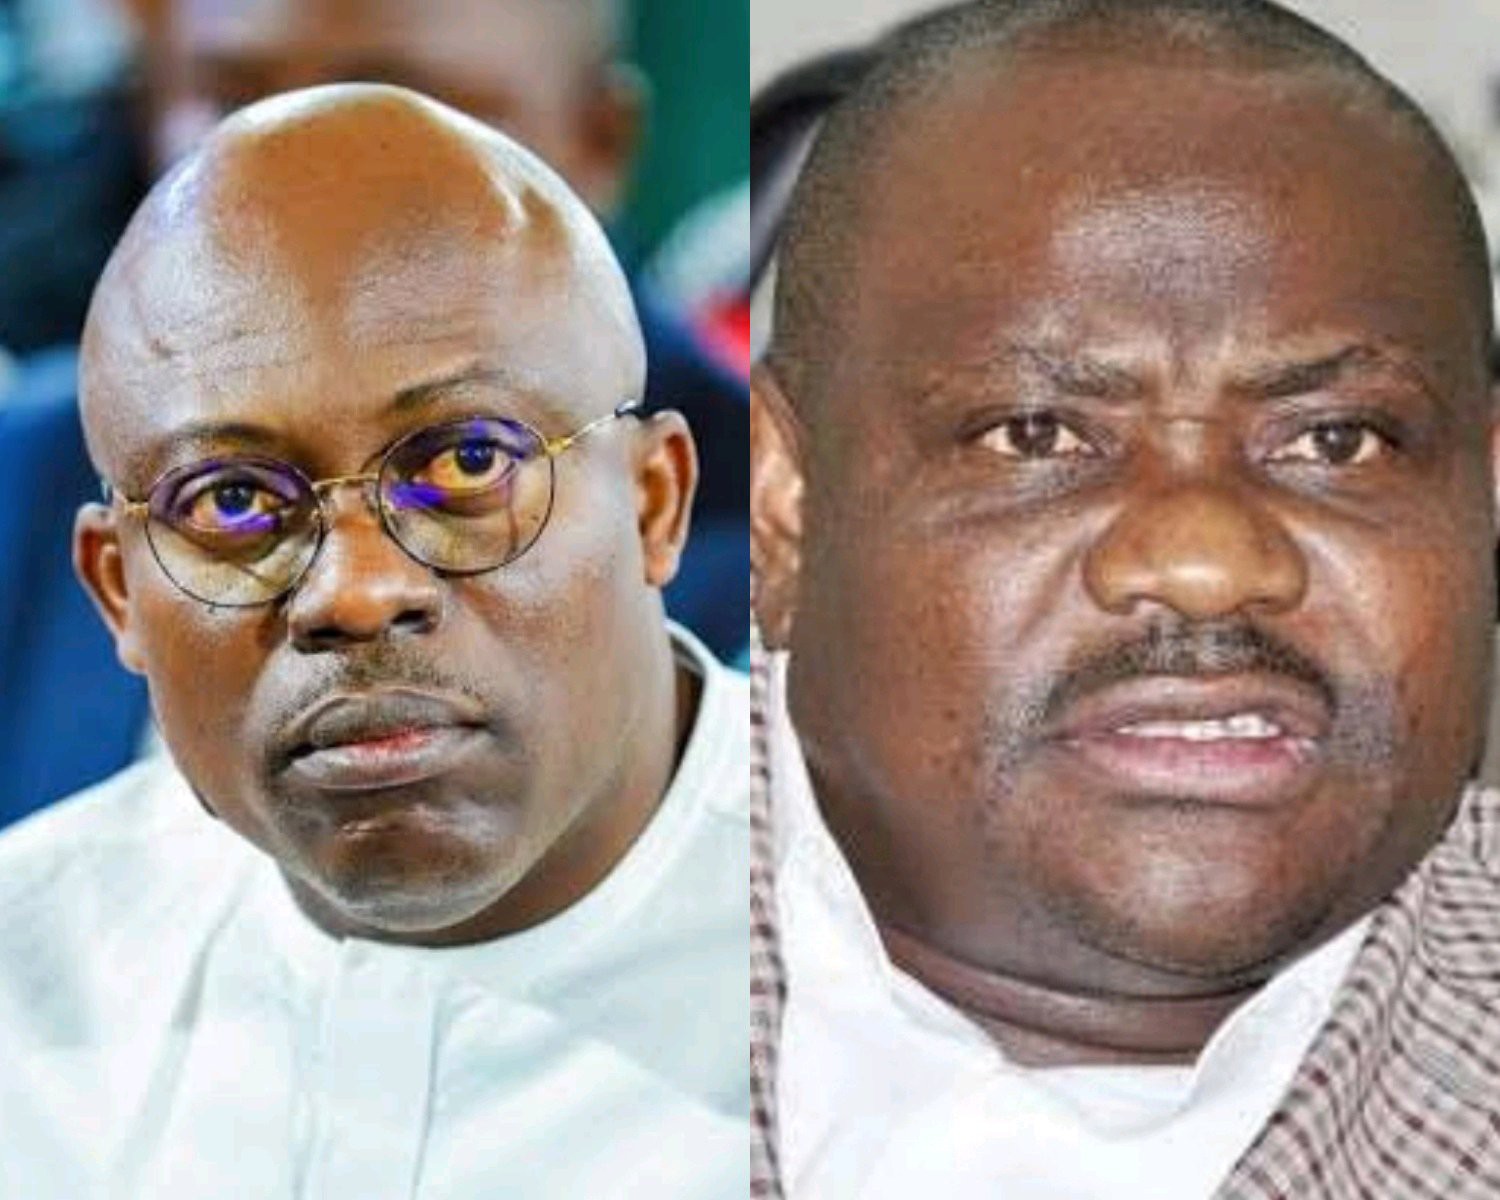 Nyesom Wike: Fubara protected you when the EFCC wanted you, he put it on his head - According to Anabs Sara Igbe